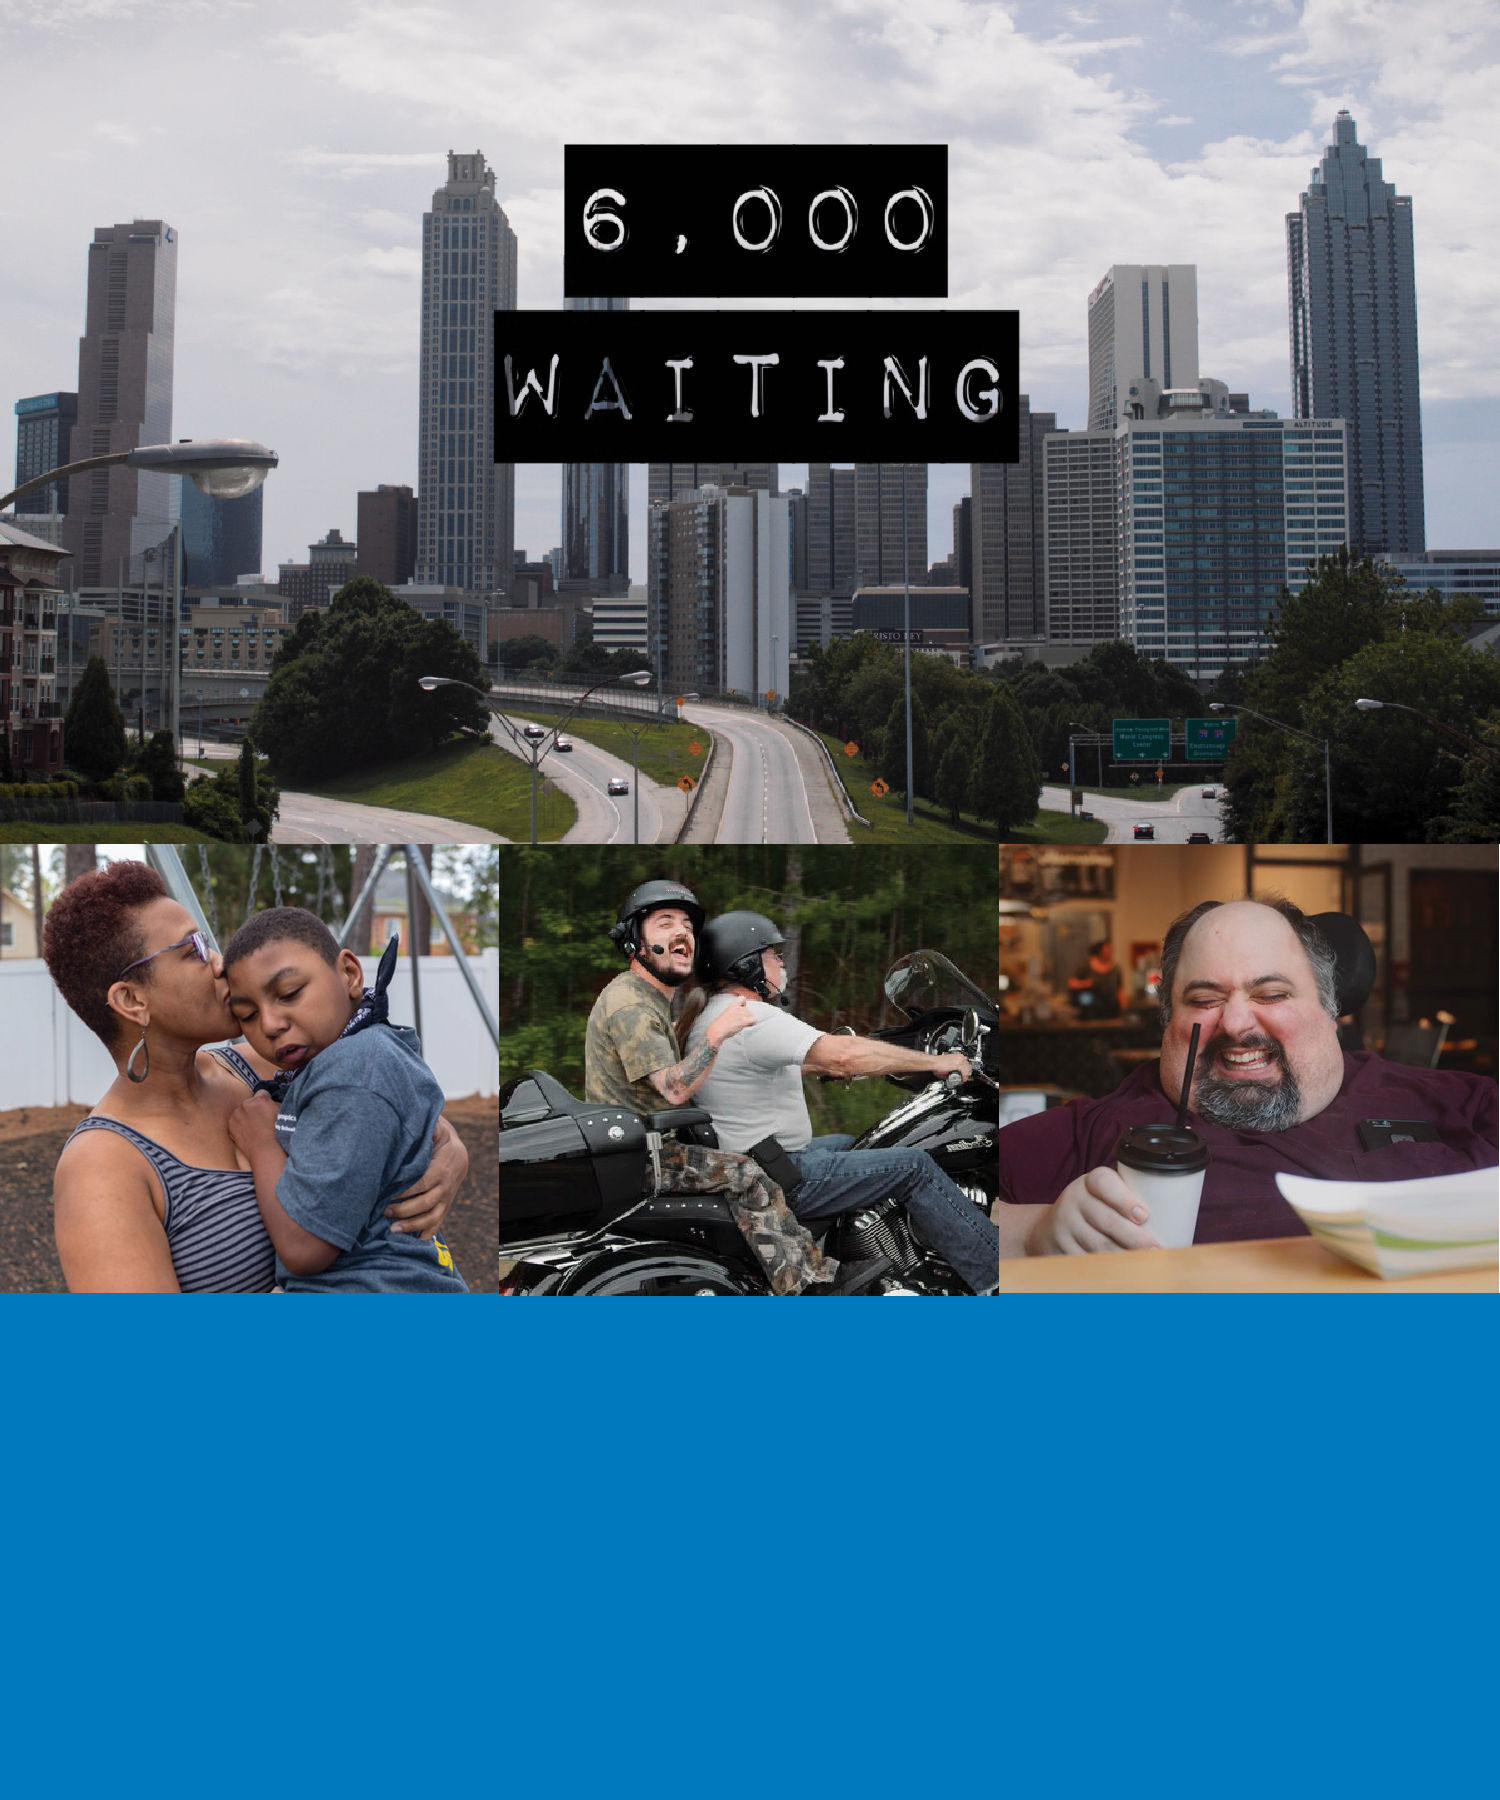 GCDD’s documentary film, 6,000 Waiting, tells the powerful stories of three Georgians with developmental disabilities impacted by the lack and complexity of state Medicaid waiver funding. With persistence, courage, and self-determination, they fight to access the resources they desperately need to live life on their own terms. Read more or watch the trailer here.